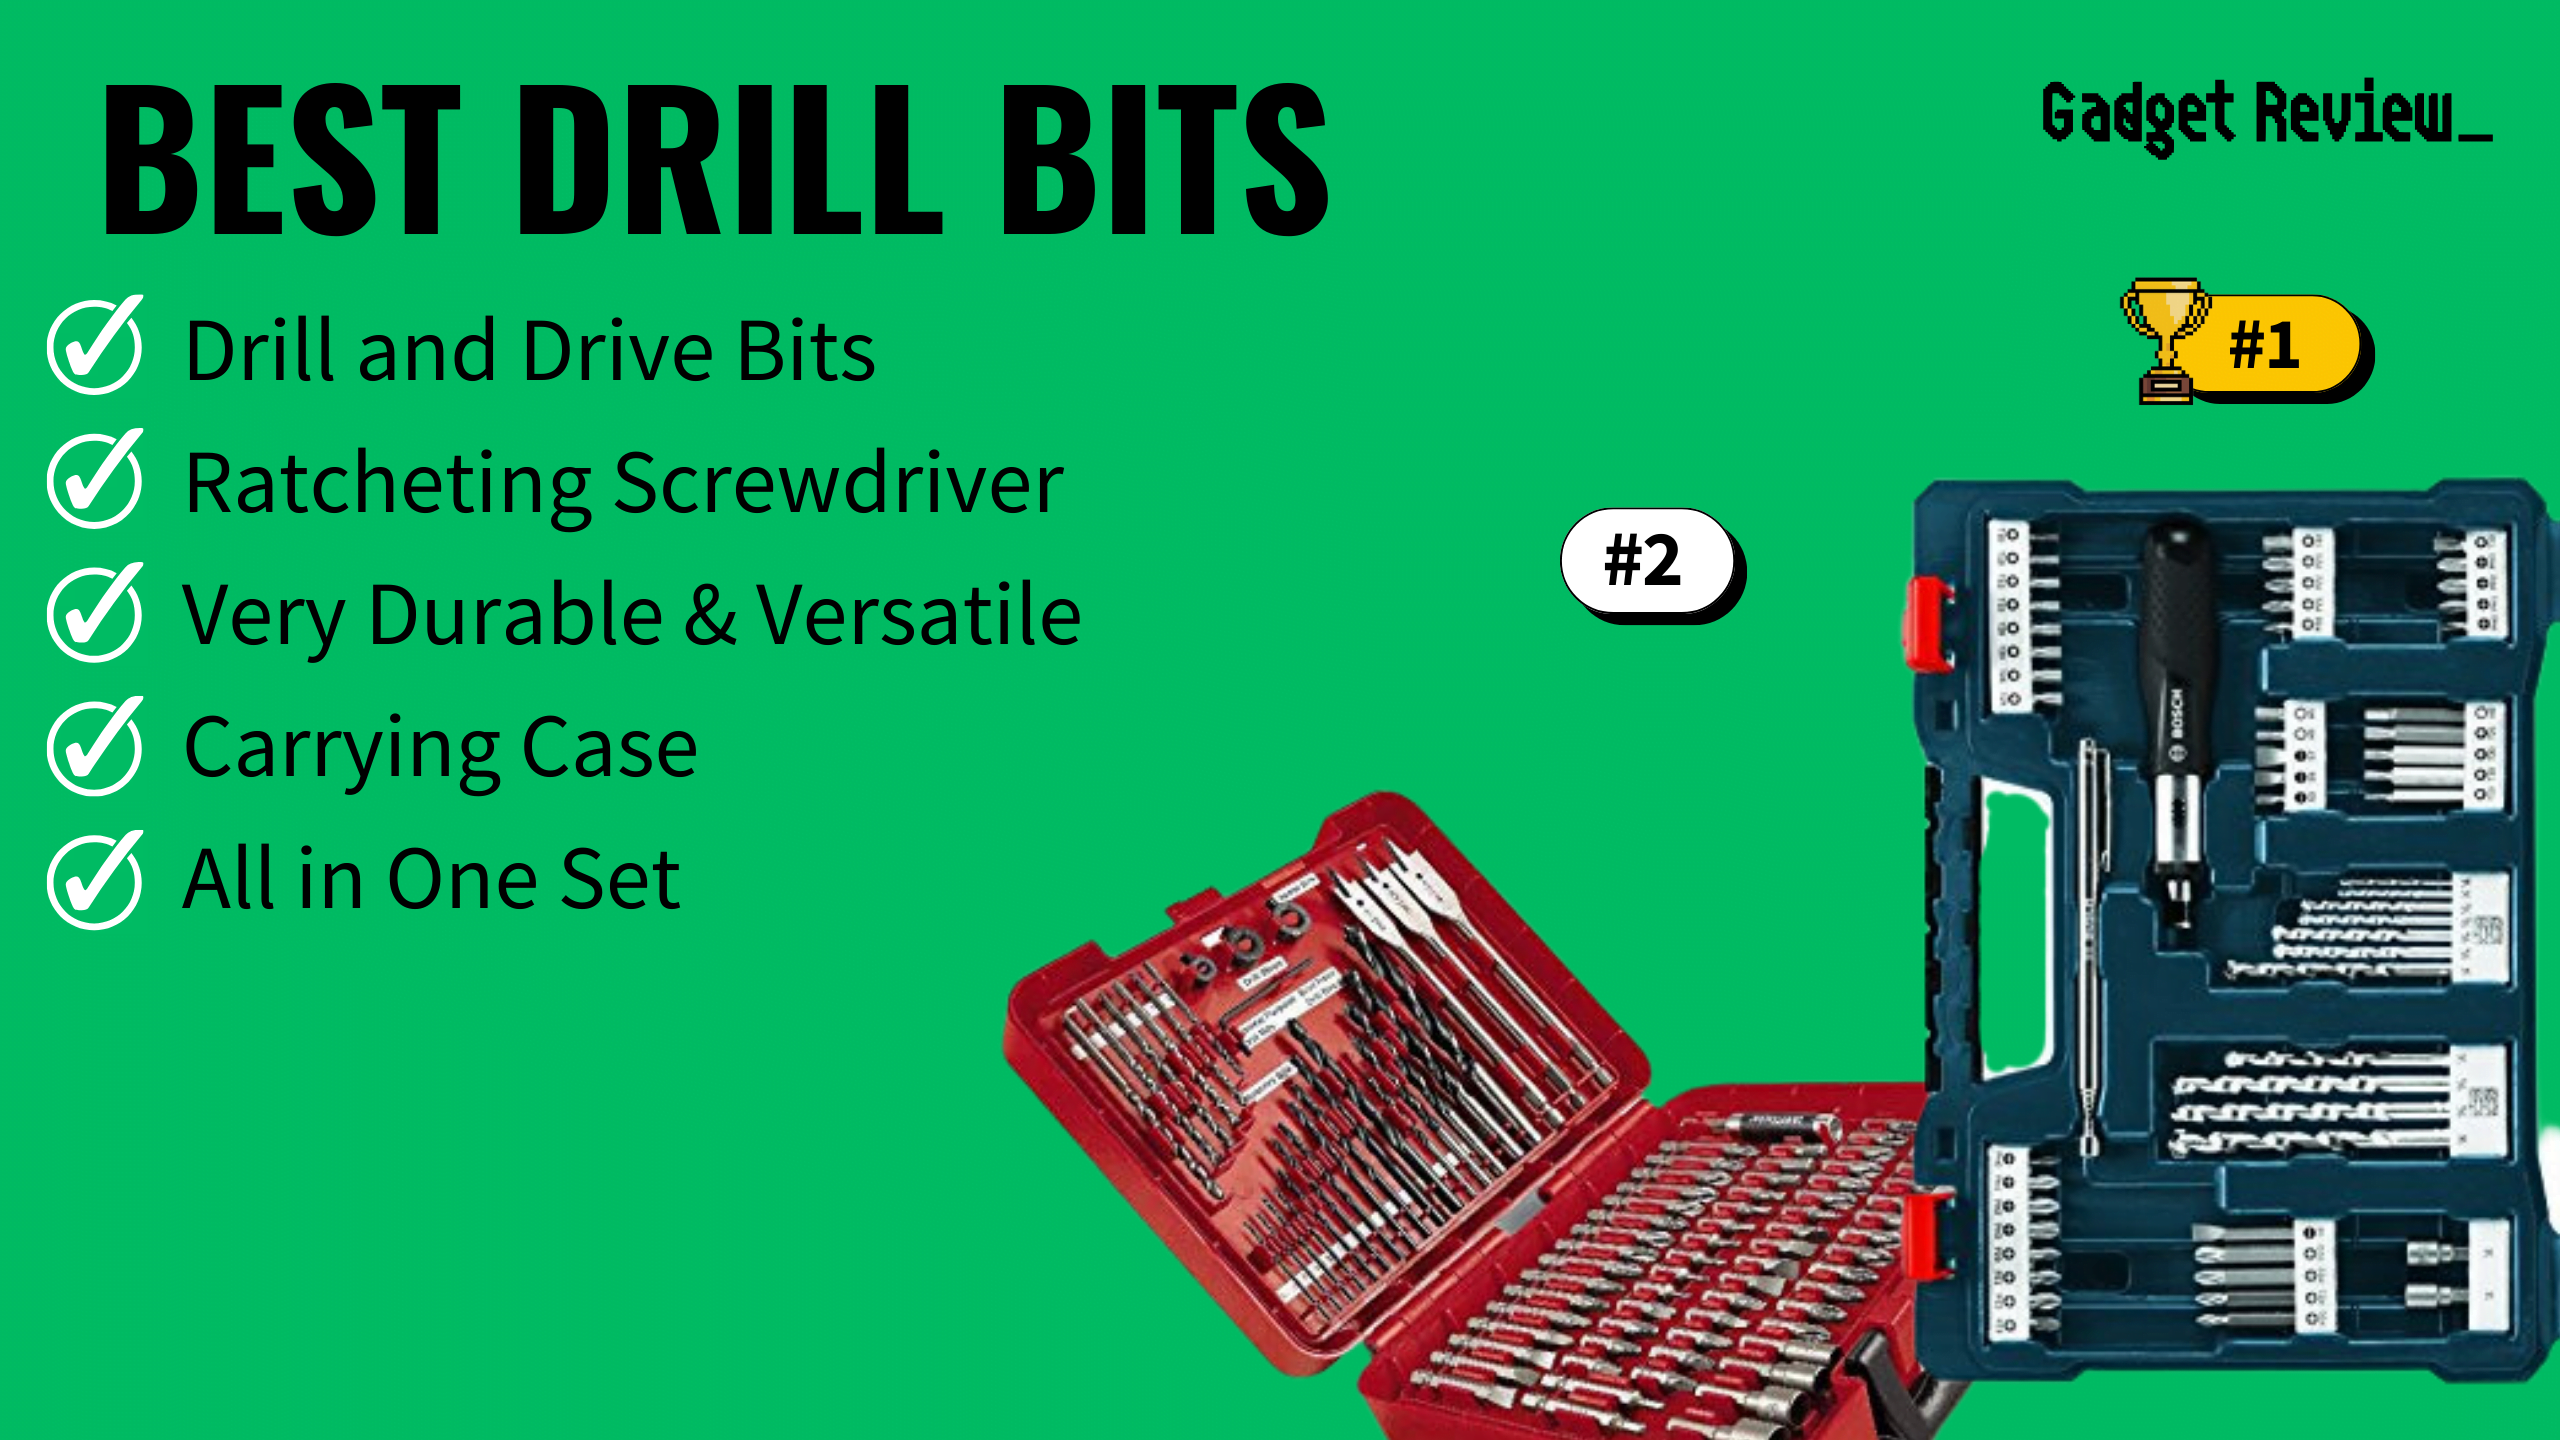 best drill bits featured image that shows the top three best tool models